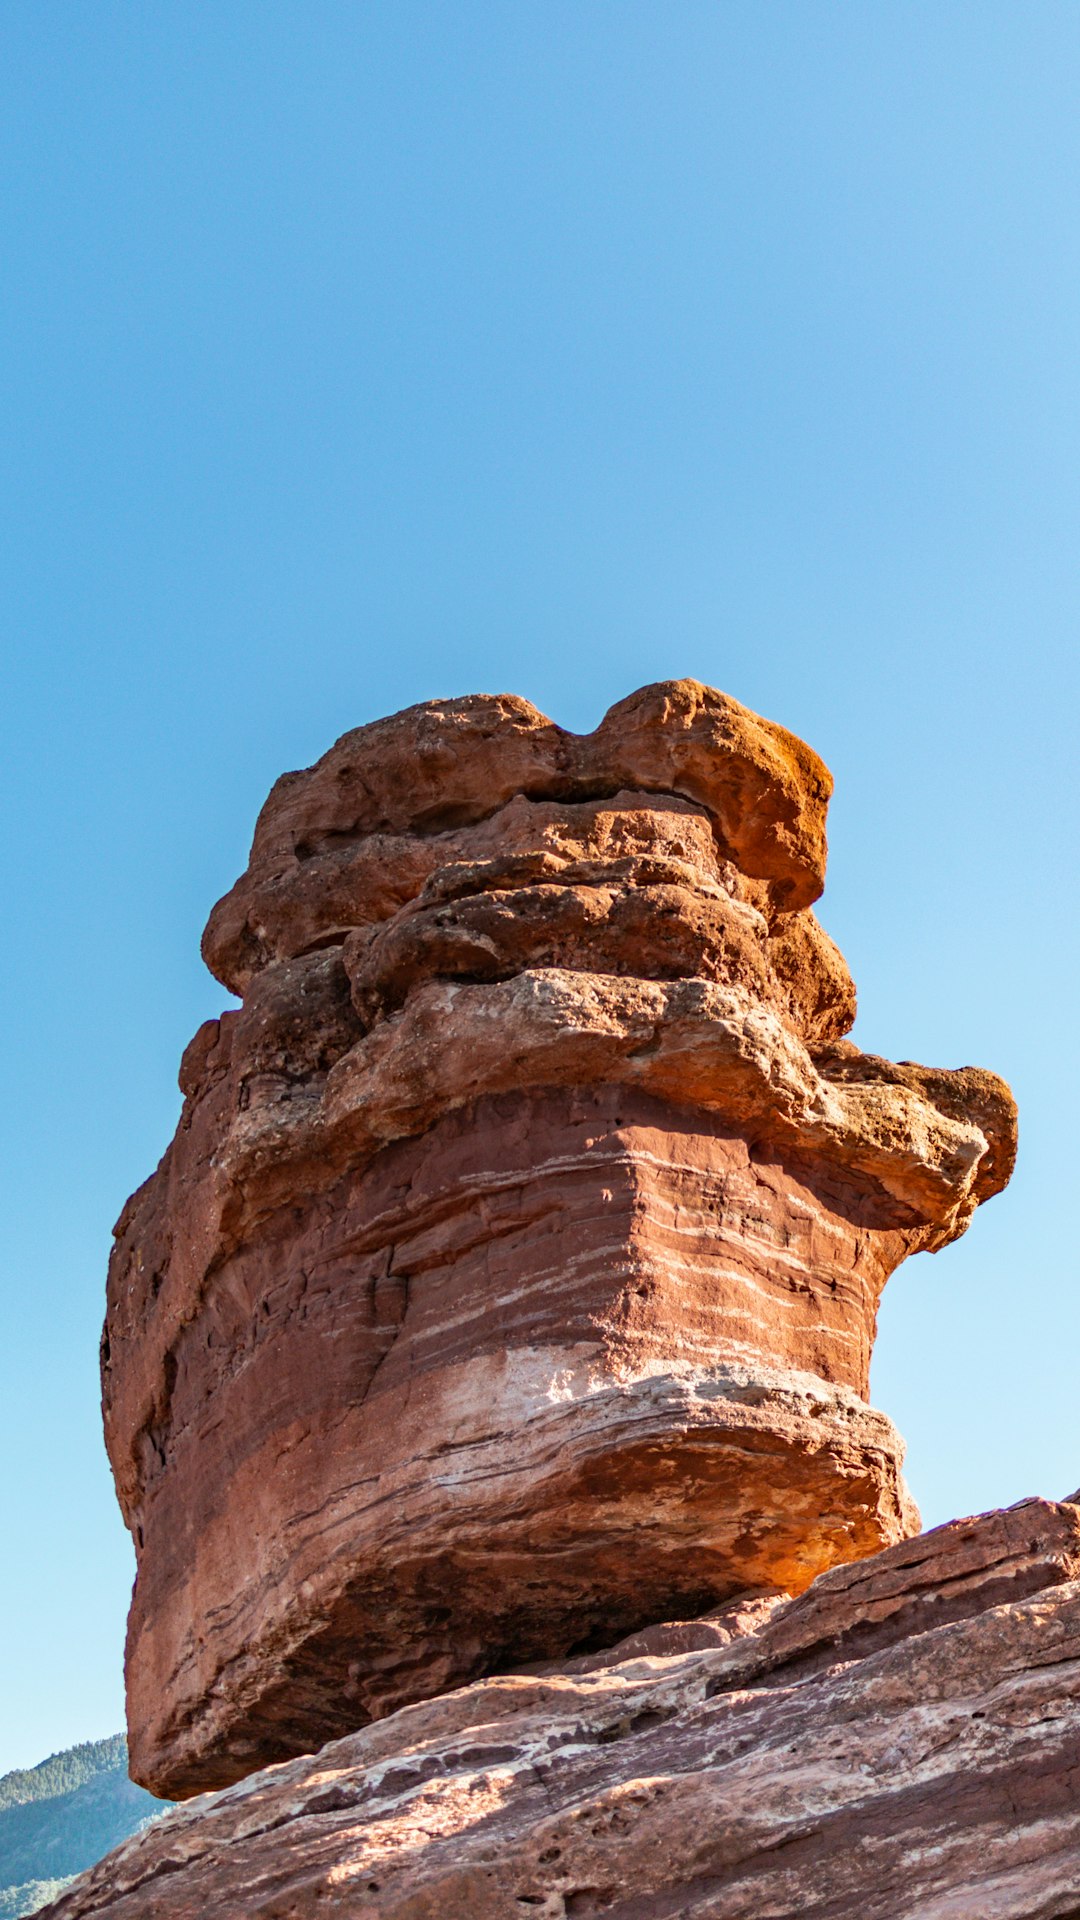 10 : The Rugged Beauty of Arches National Park - Exploring Arches National Park